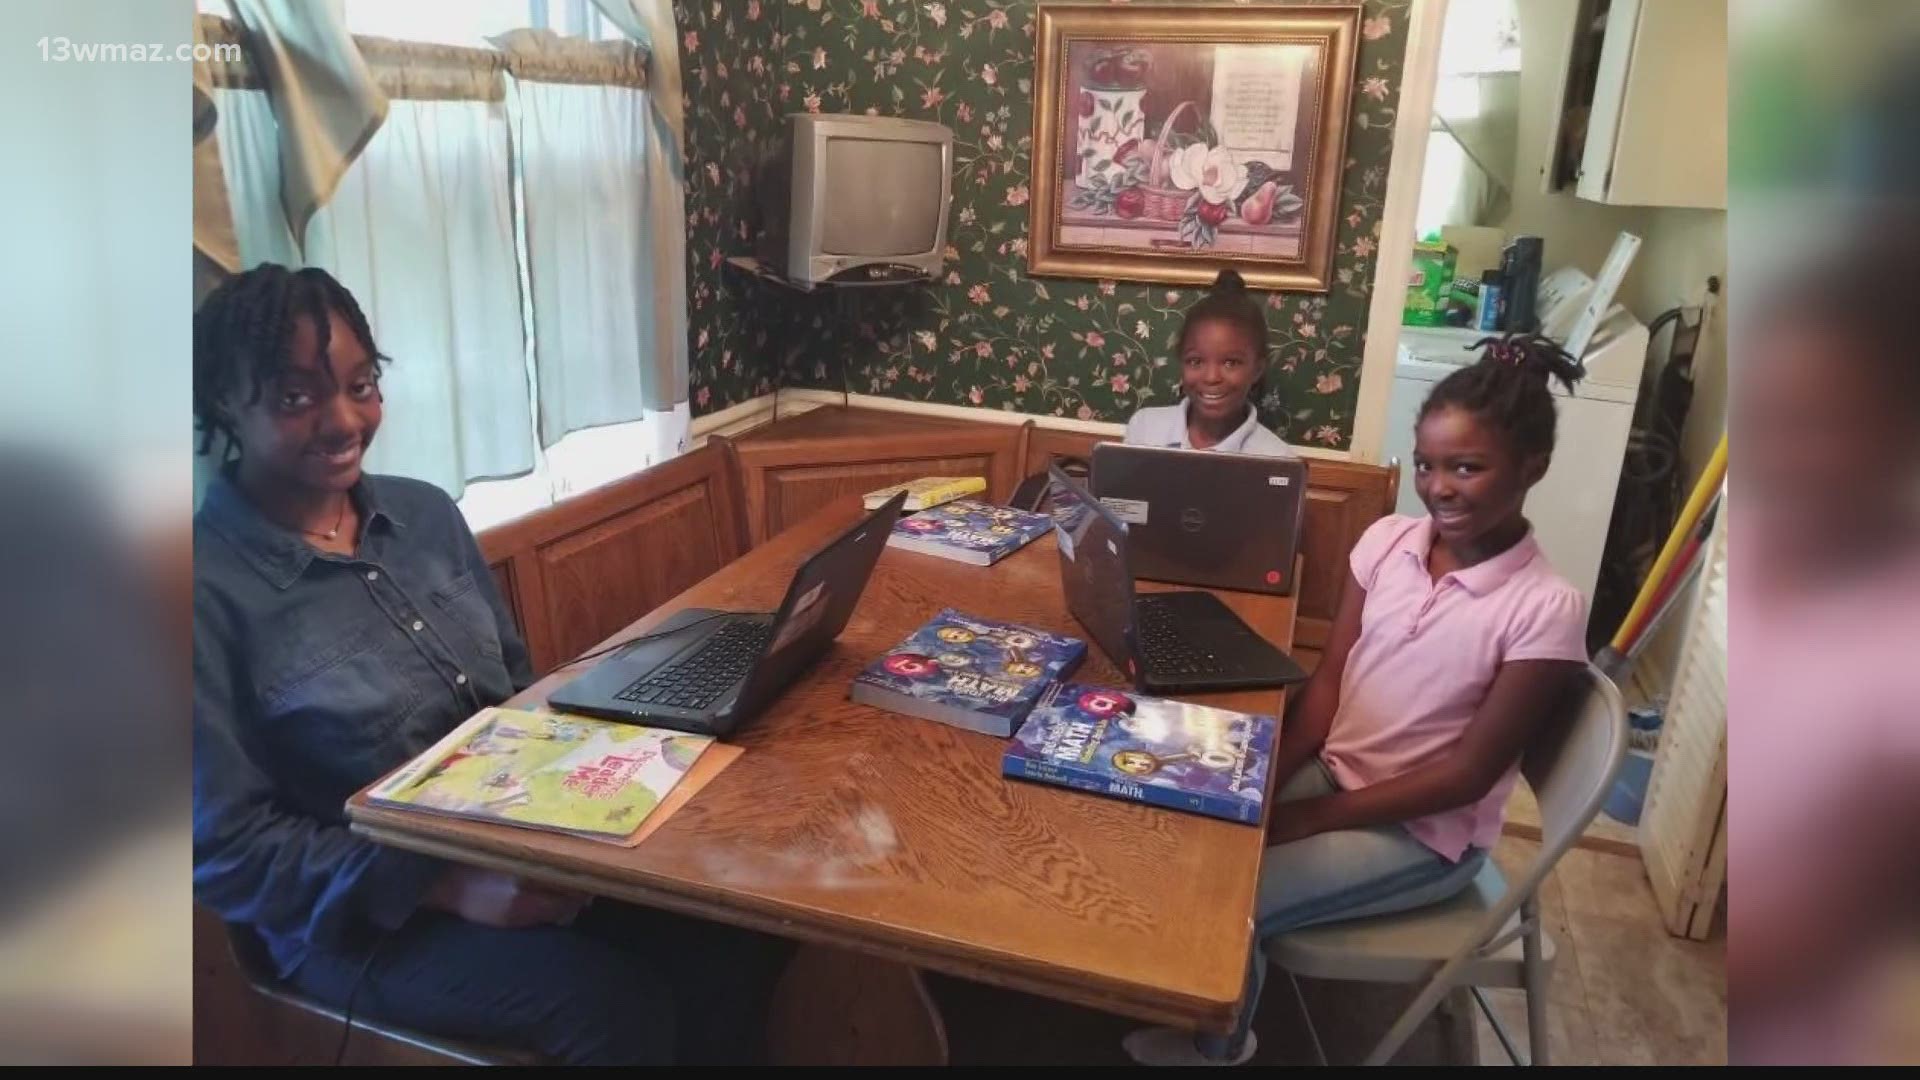 Angela Thomas is the mother of six kids, who are all doing online learning.